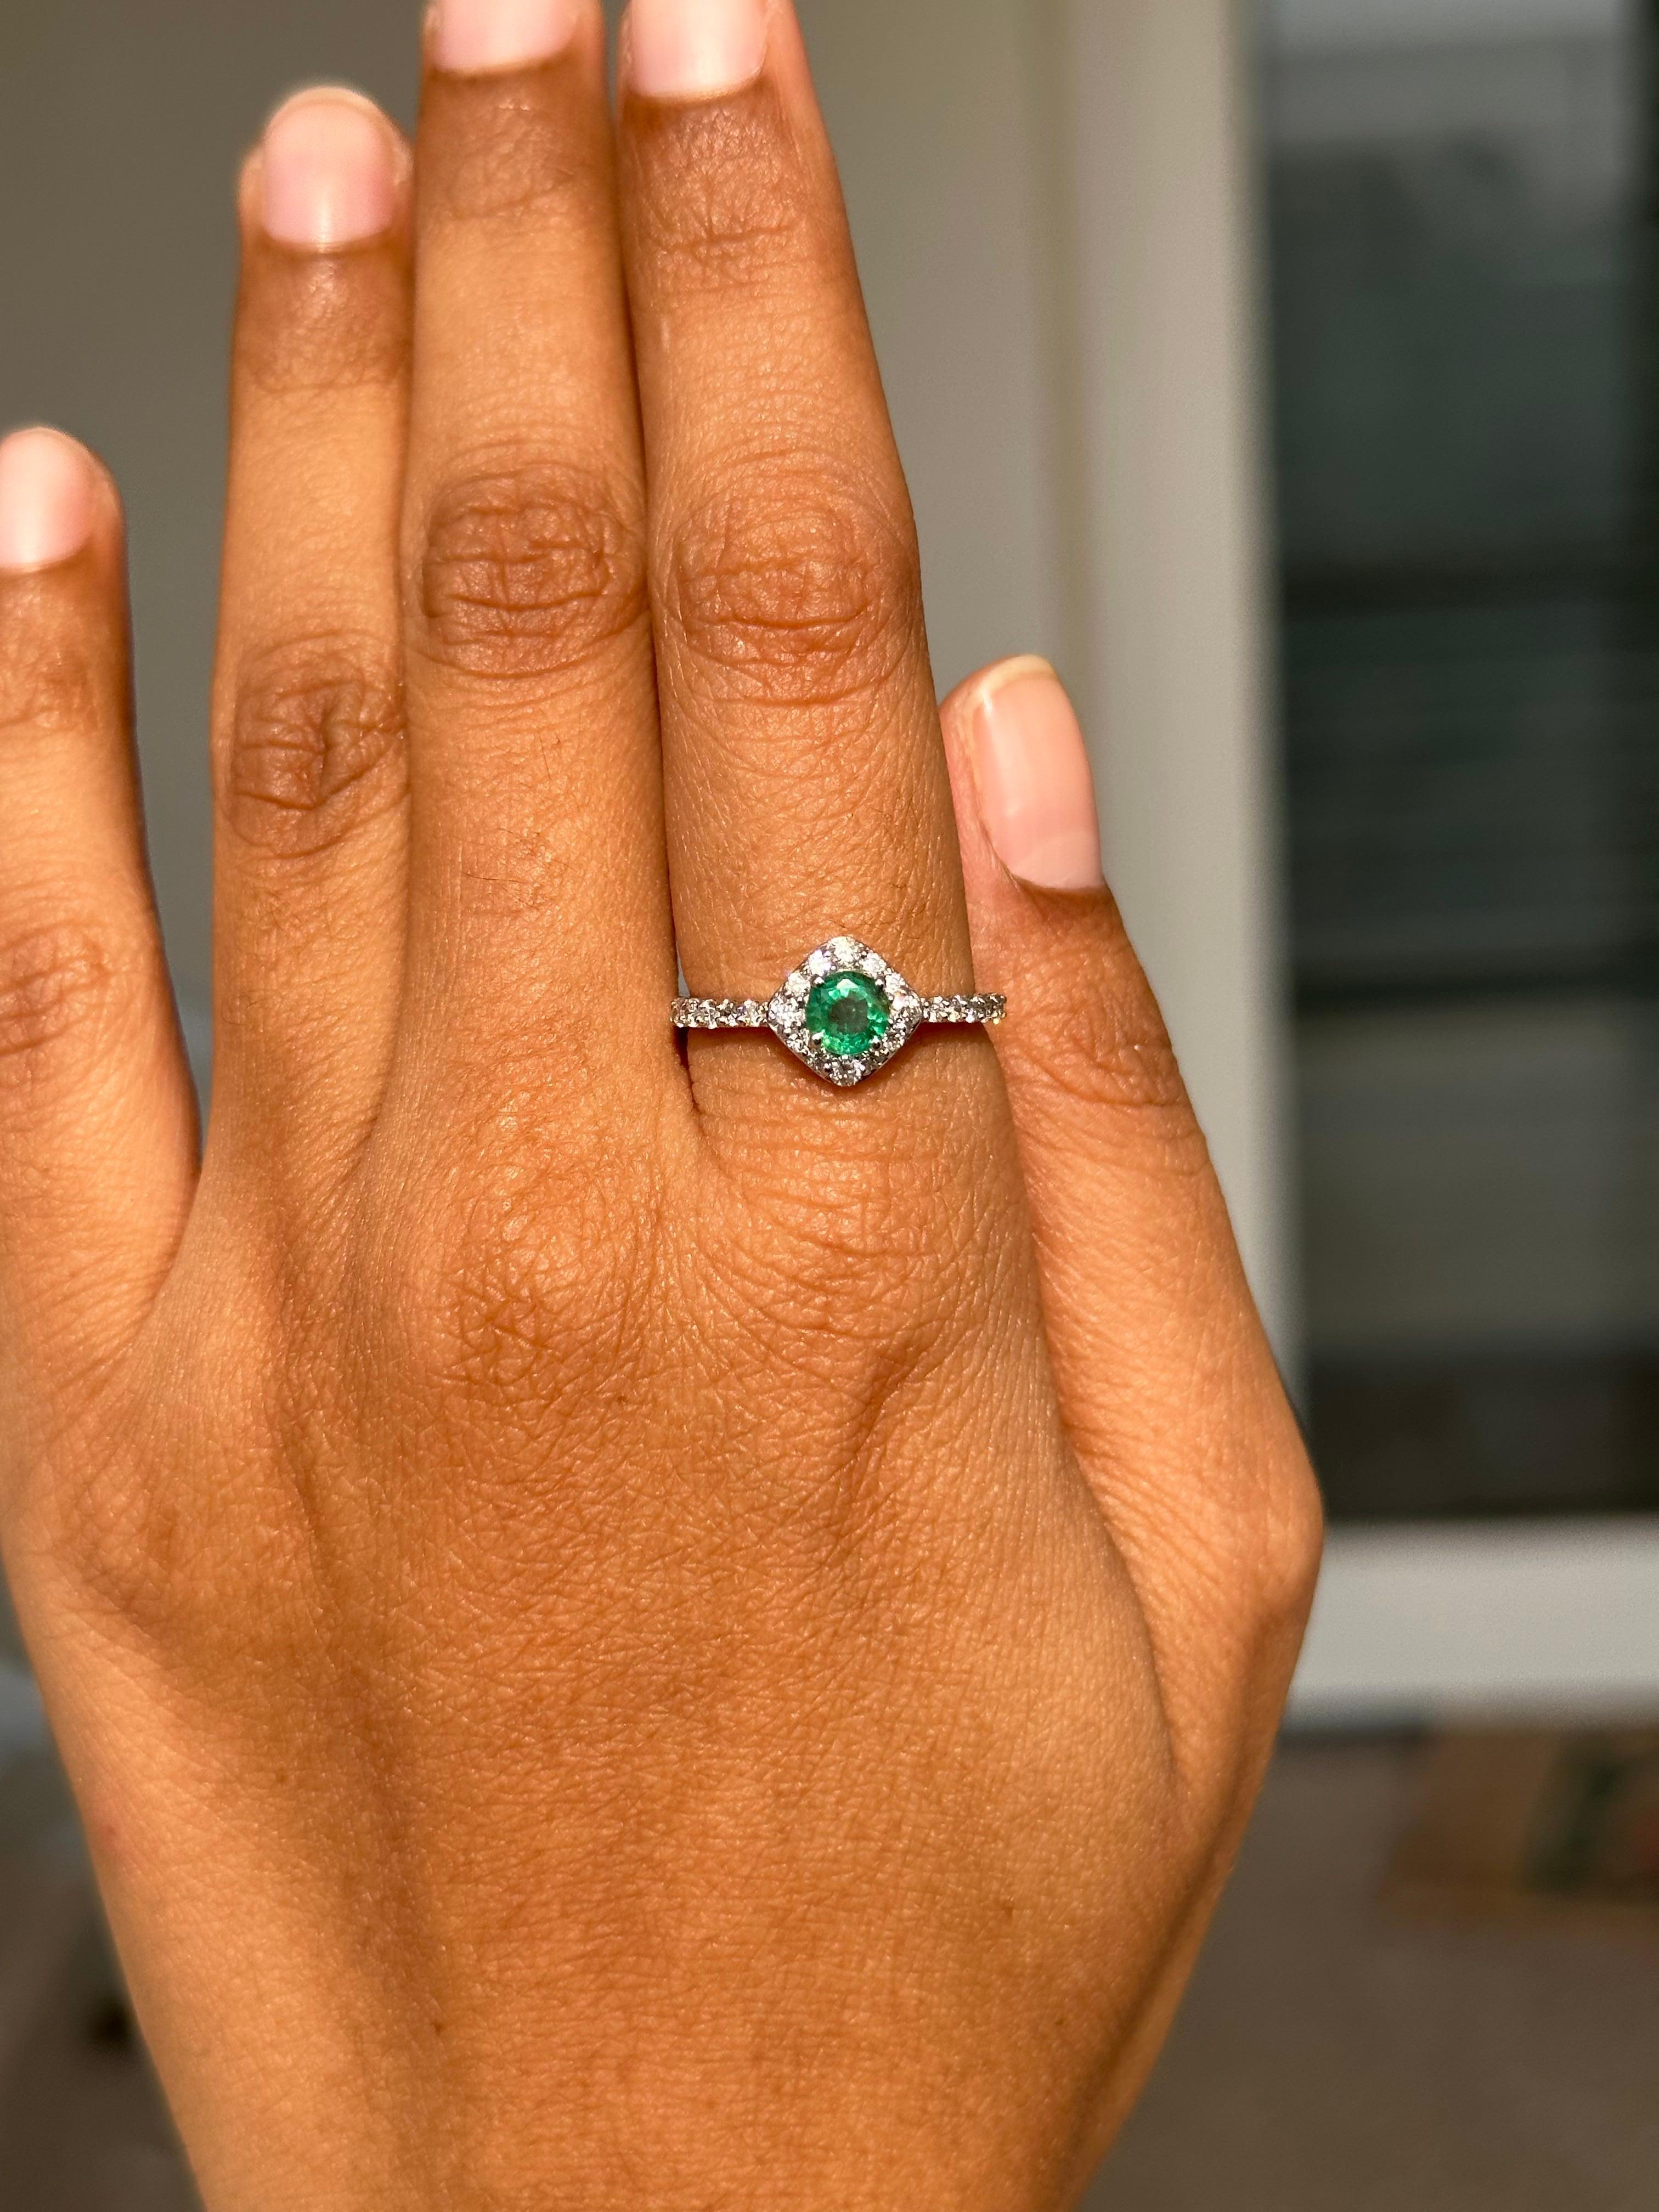 For Sale:  Dainty Halo Diamond Emerald Ring Handcrafted in 14k Solid White Gold 9